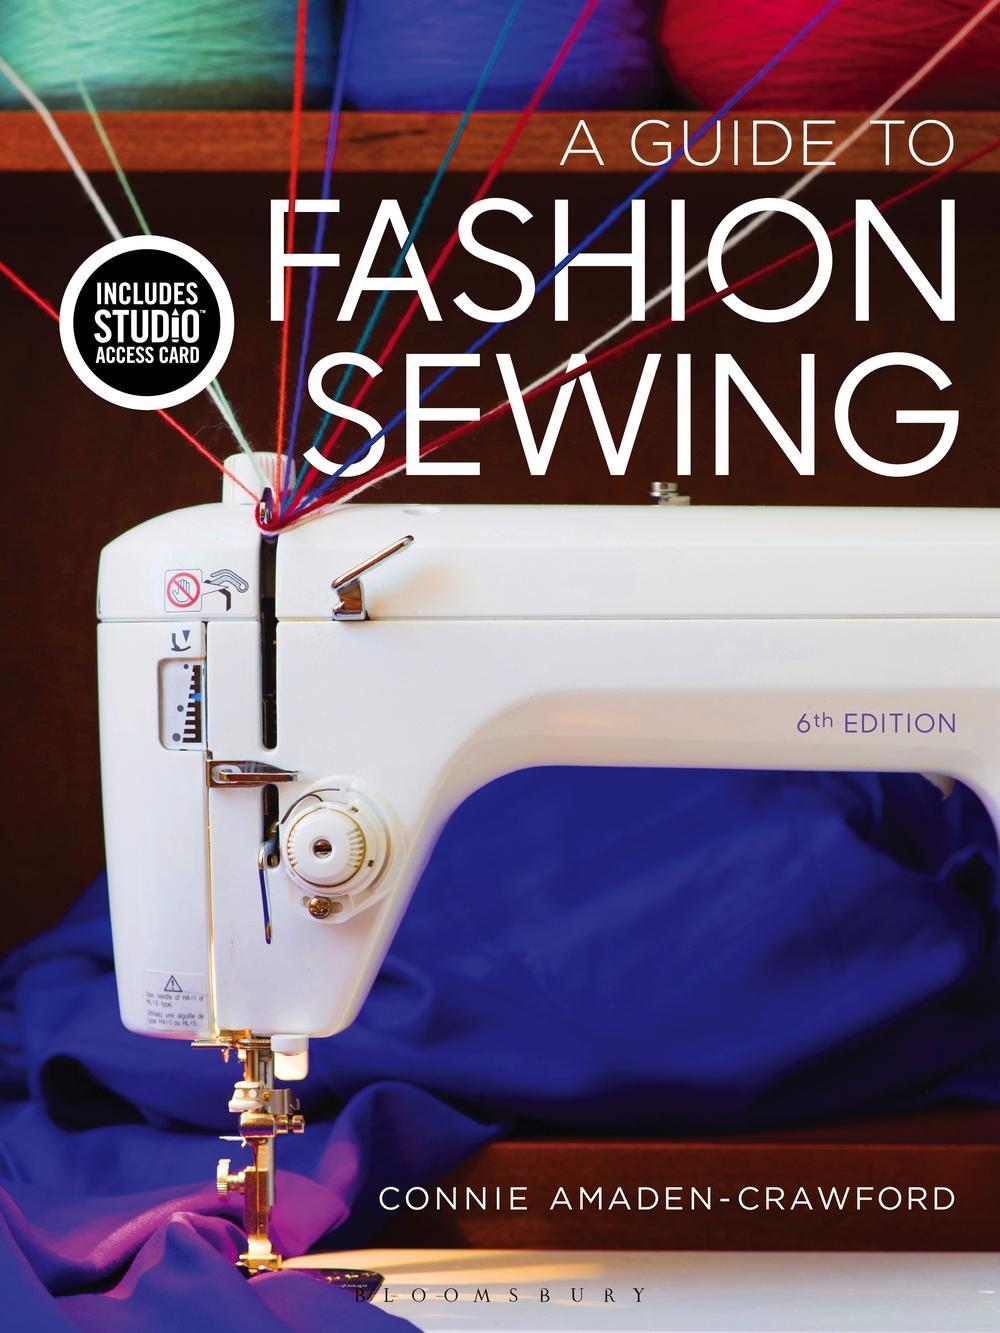 Guide to Fashion Sewing - Connie Amaden Crawford